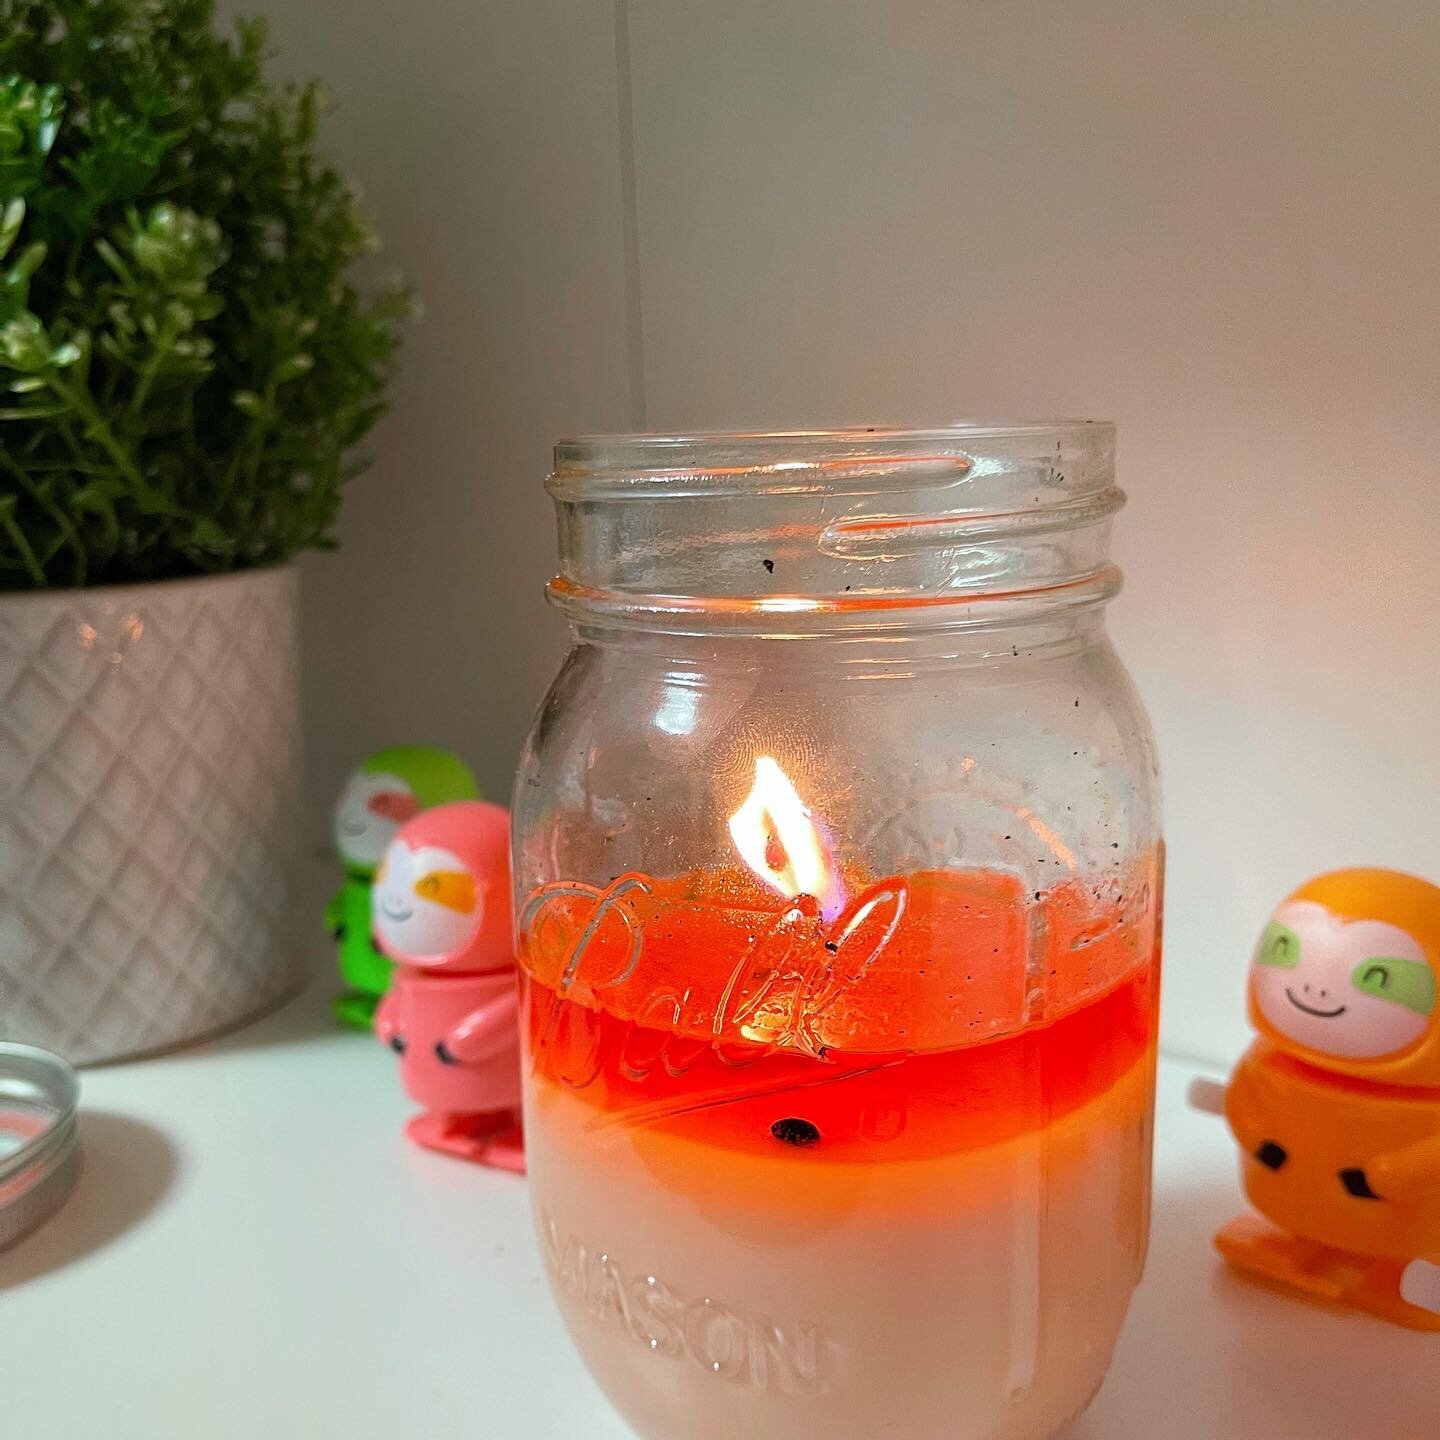 Peach Vanilla candles are perfect for a relaxing summer Sunday!